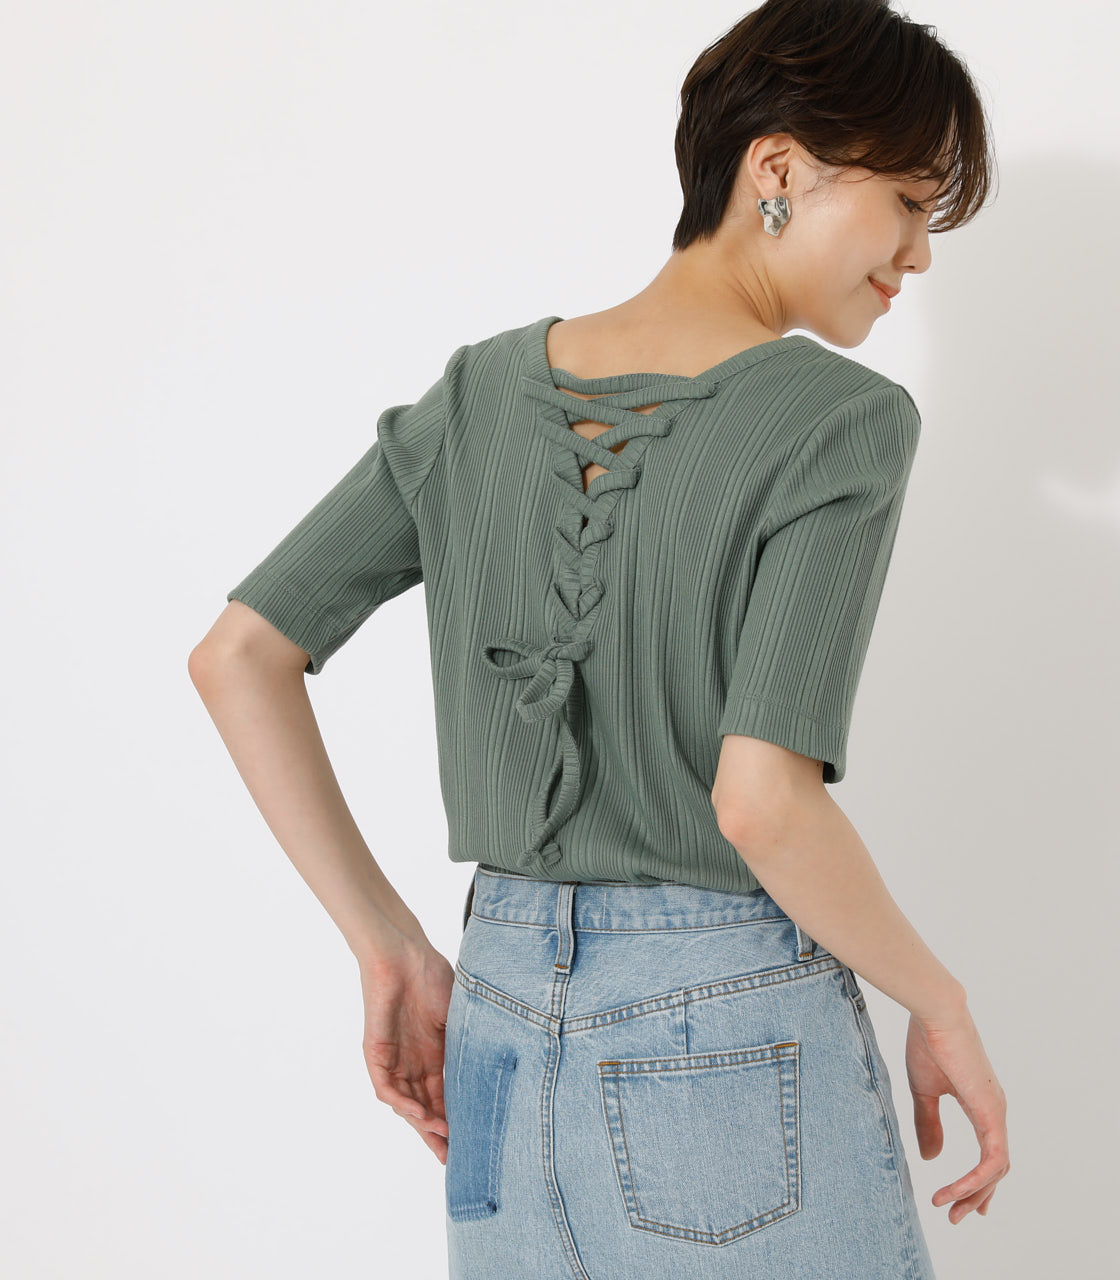 BACK LACE UP TOPS/バックレースアップトップス 詳細画像 KHA 1